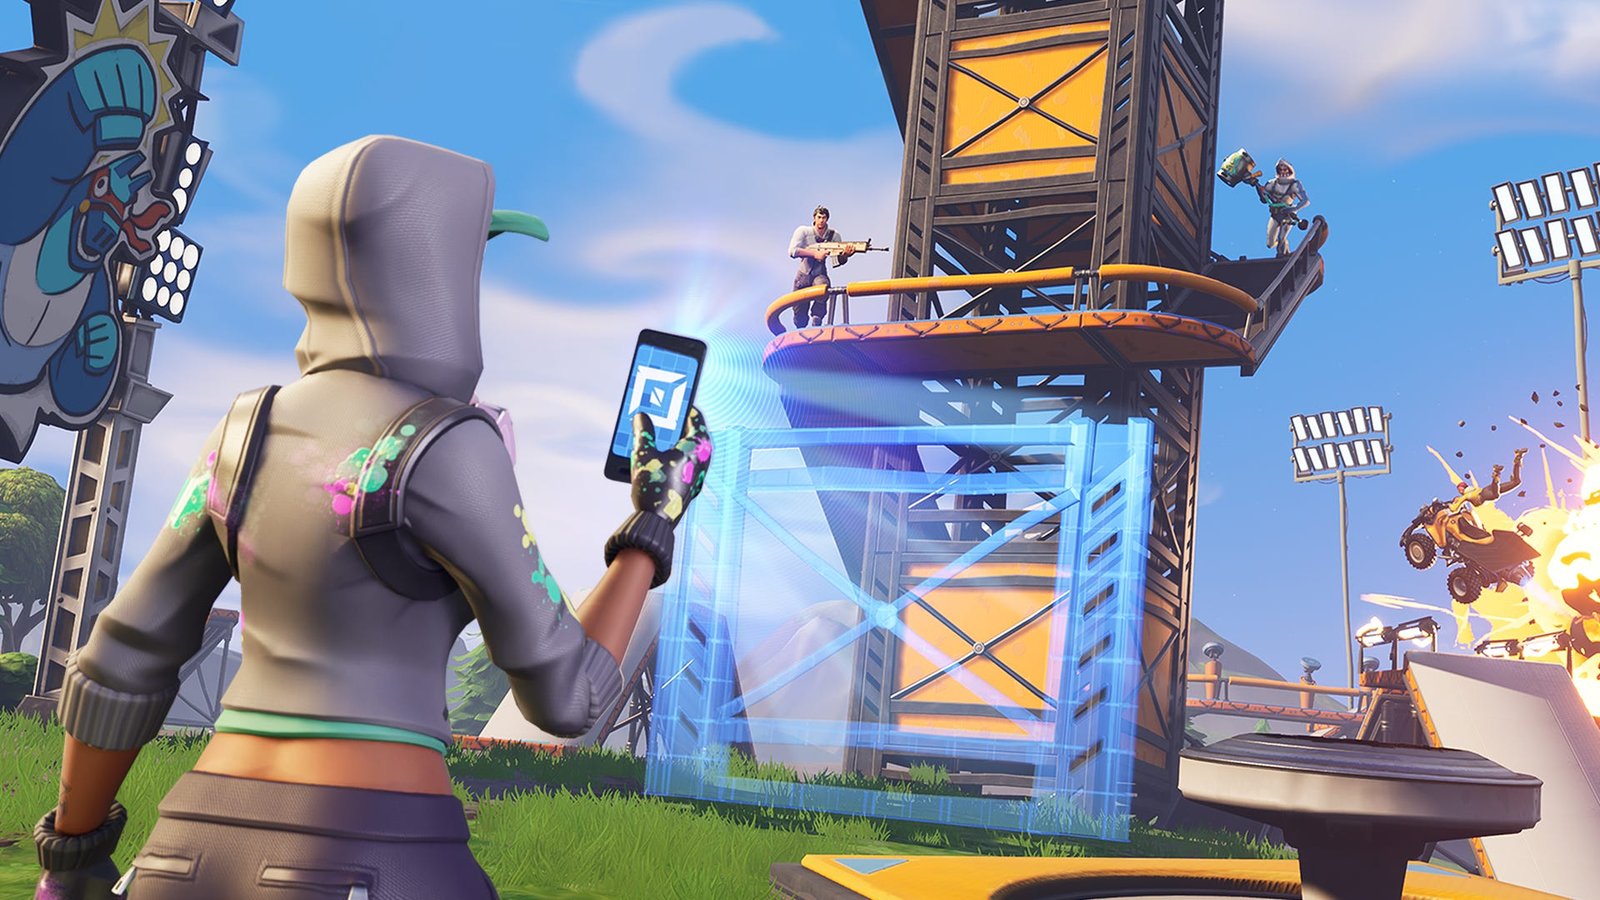 Doctor Who would be coming to Fortnite later this year